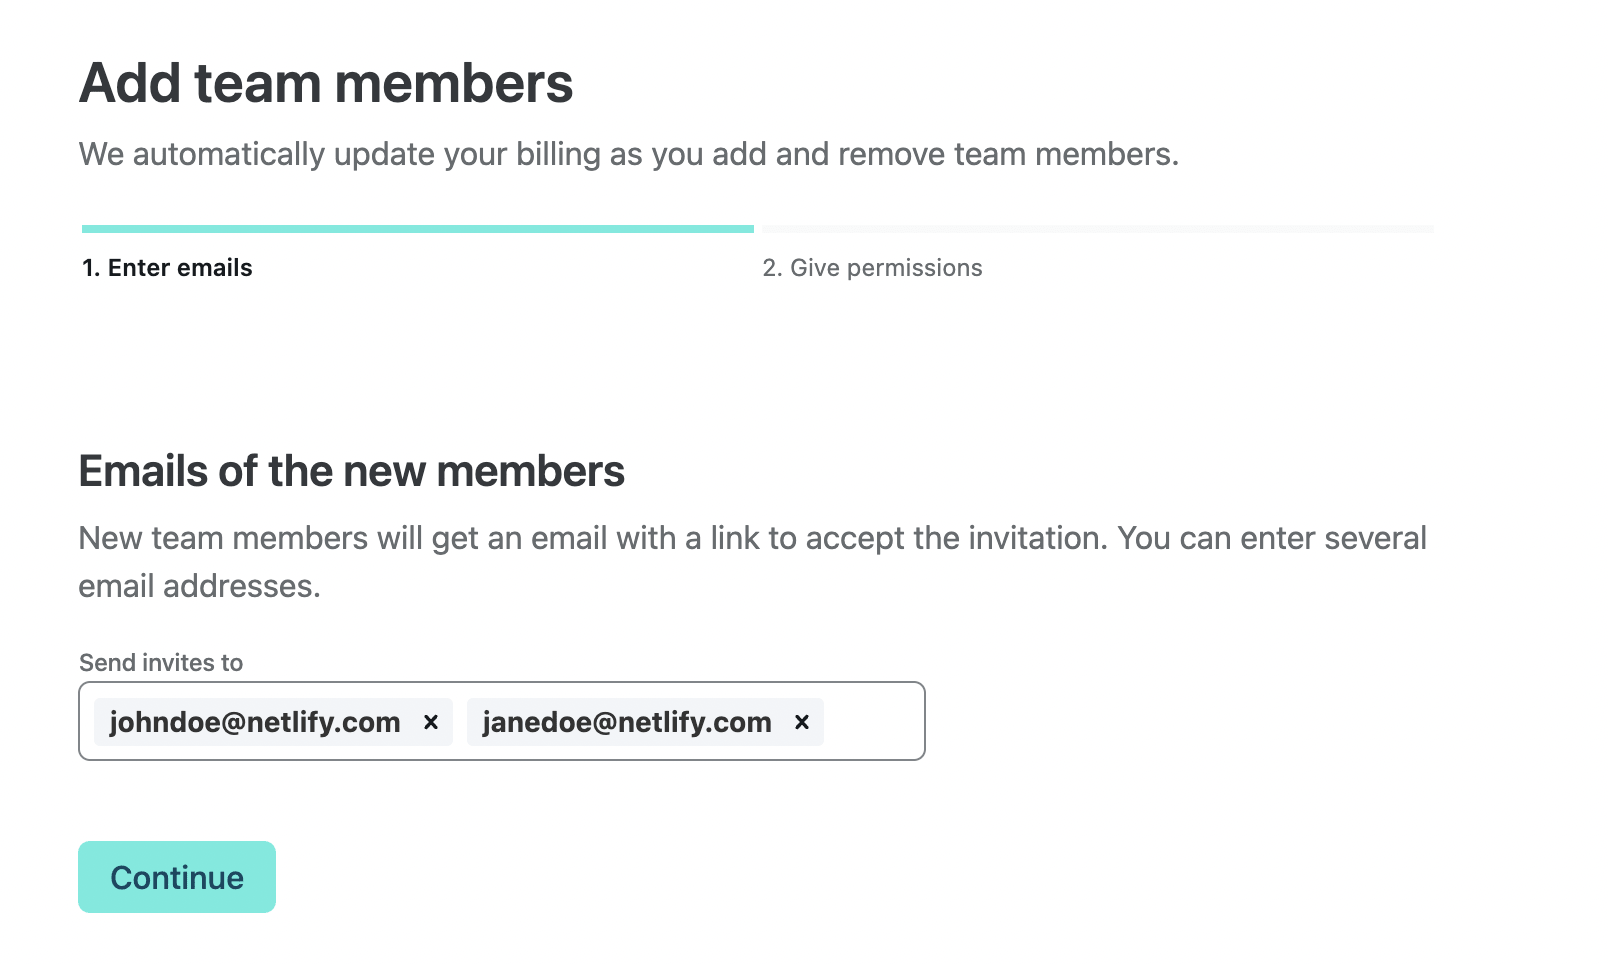 Interface to add team members asks for the emails of the new members.